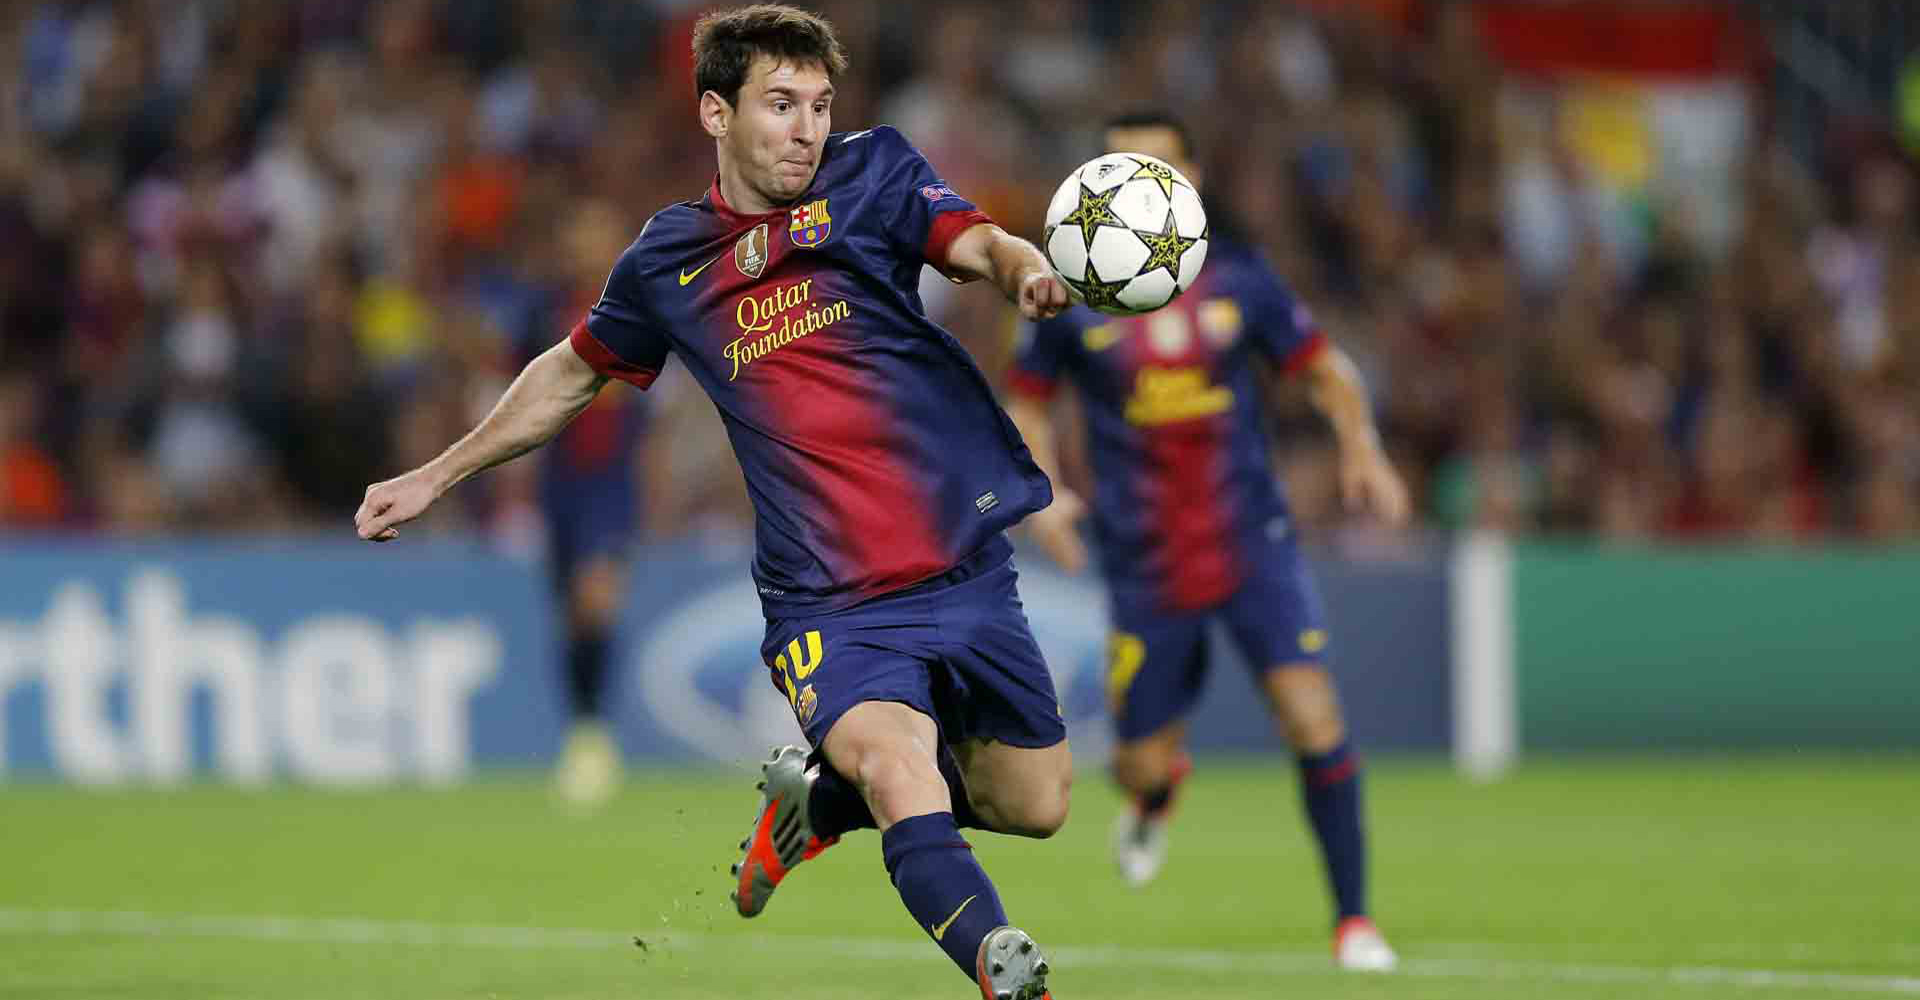 Lionel Messi 10 Scored For Barcelona FC with Left Volley